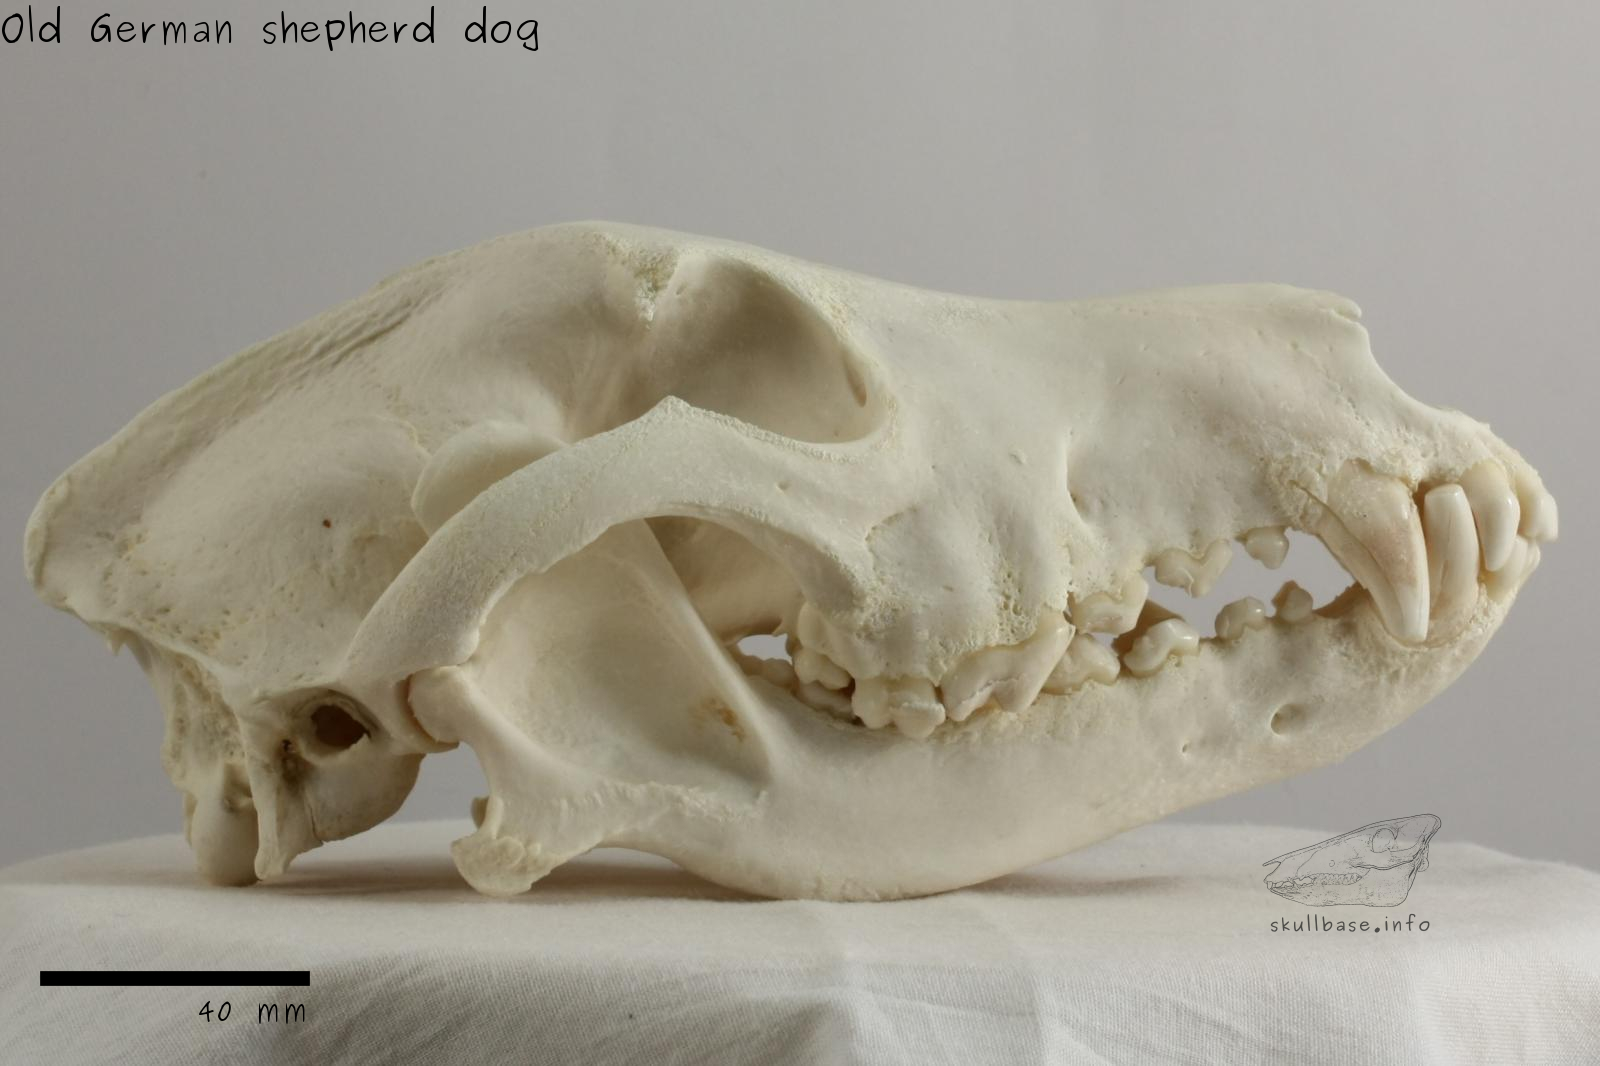 Old German shepherd dog (Canis lupus familiaris) skull lateral view